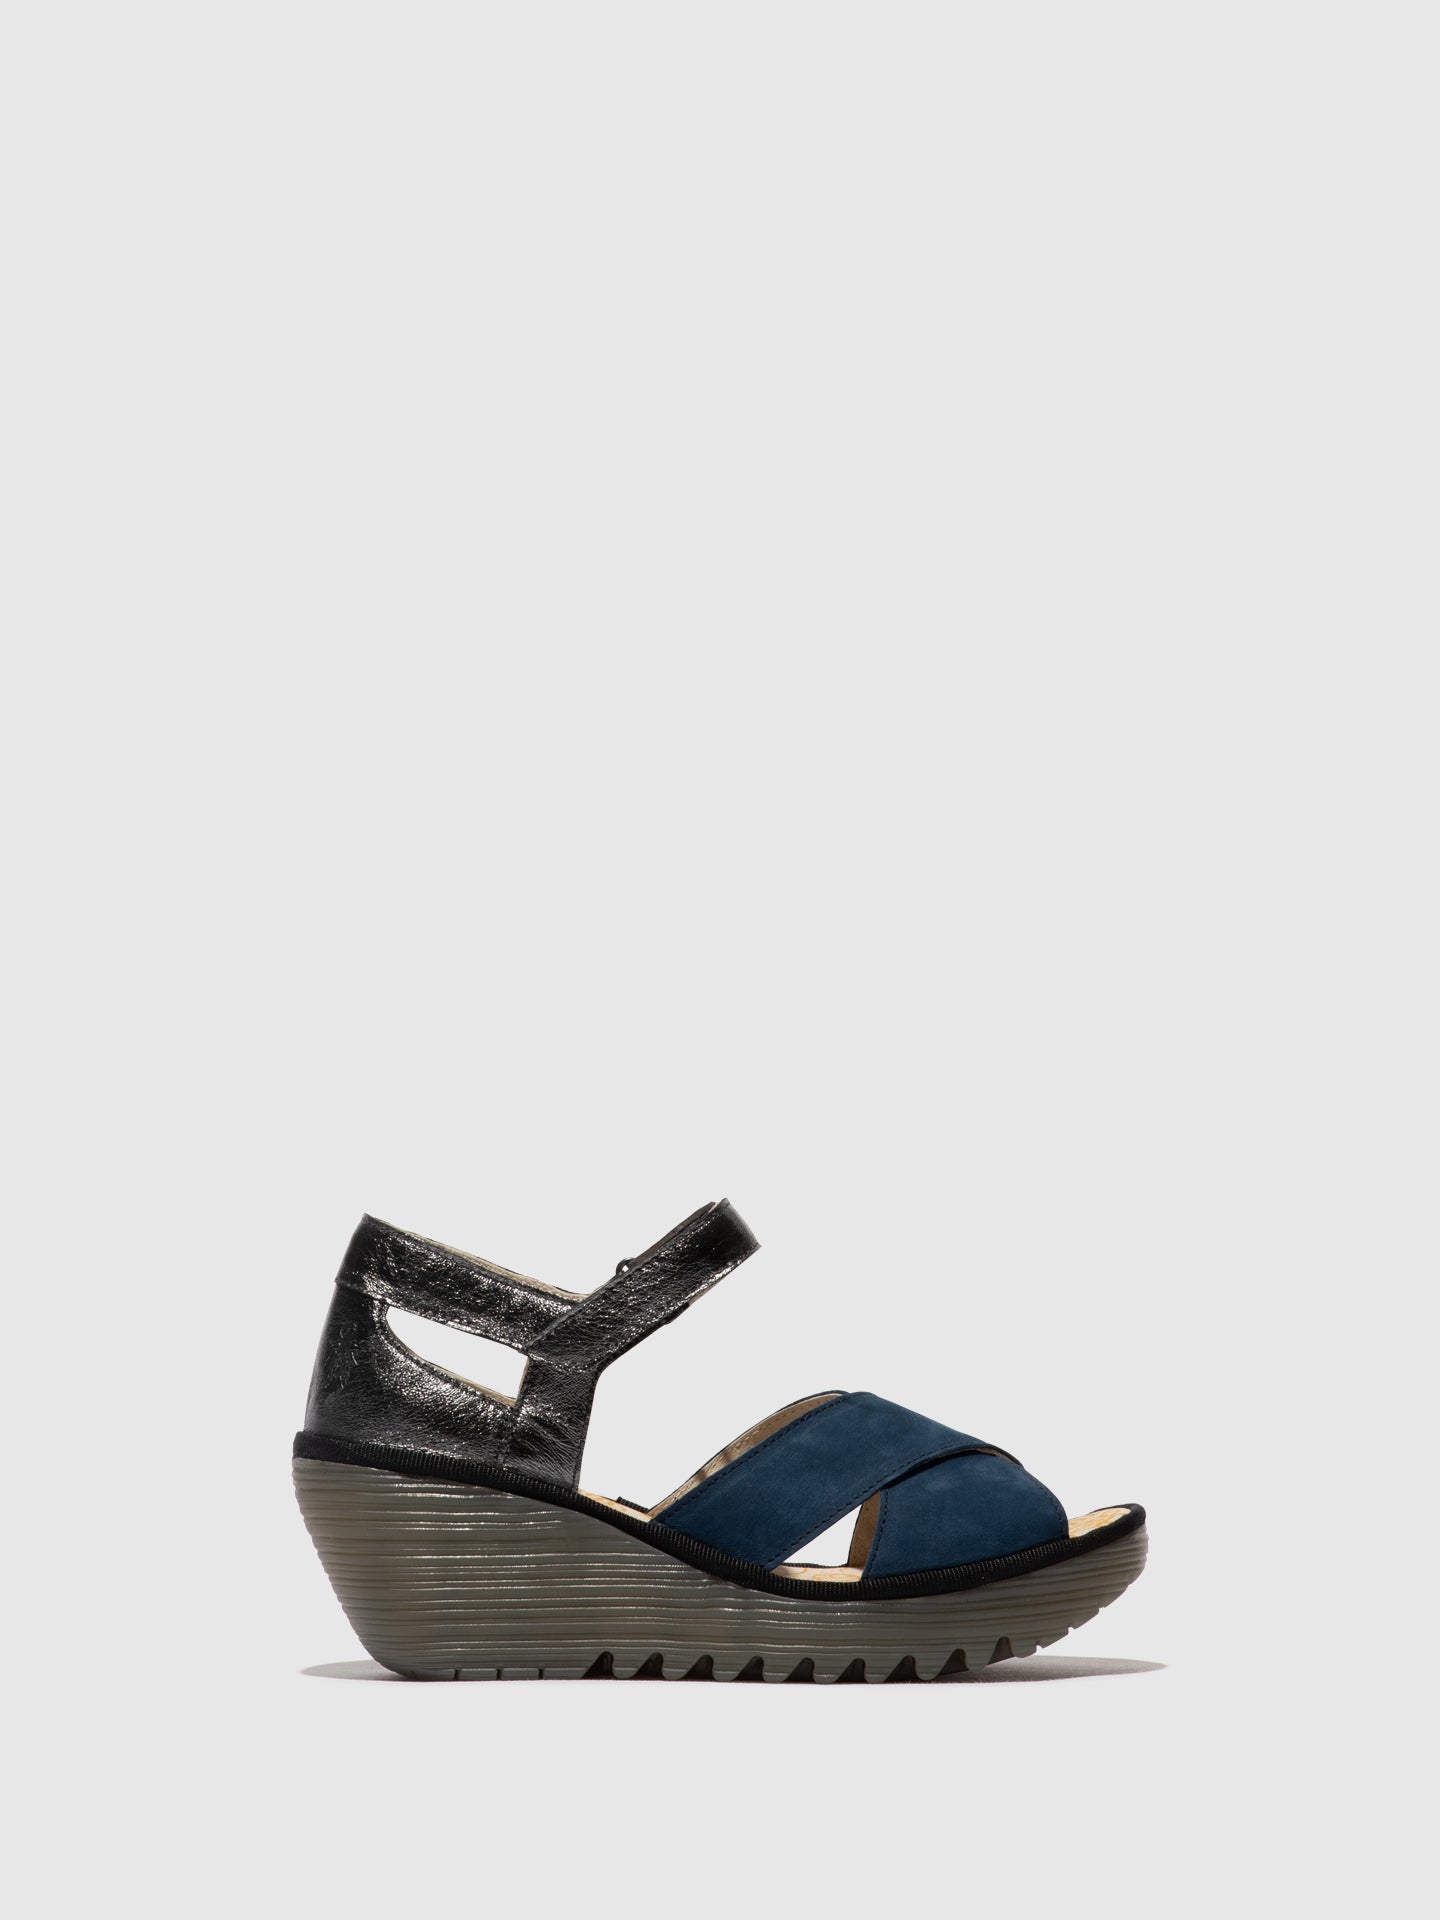 Ankle Strap Sandals YENT365FLY BLUE/GRAPHITE – Fly London EU